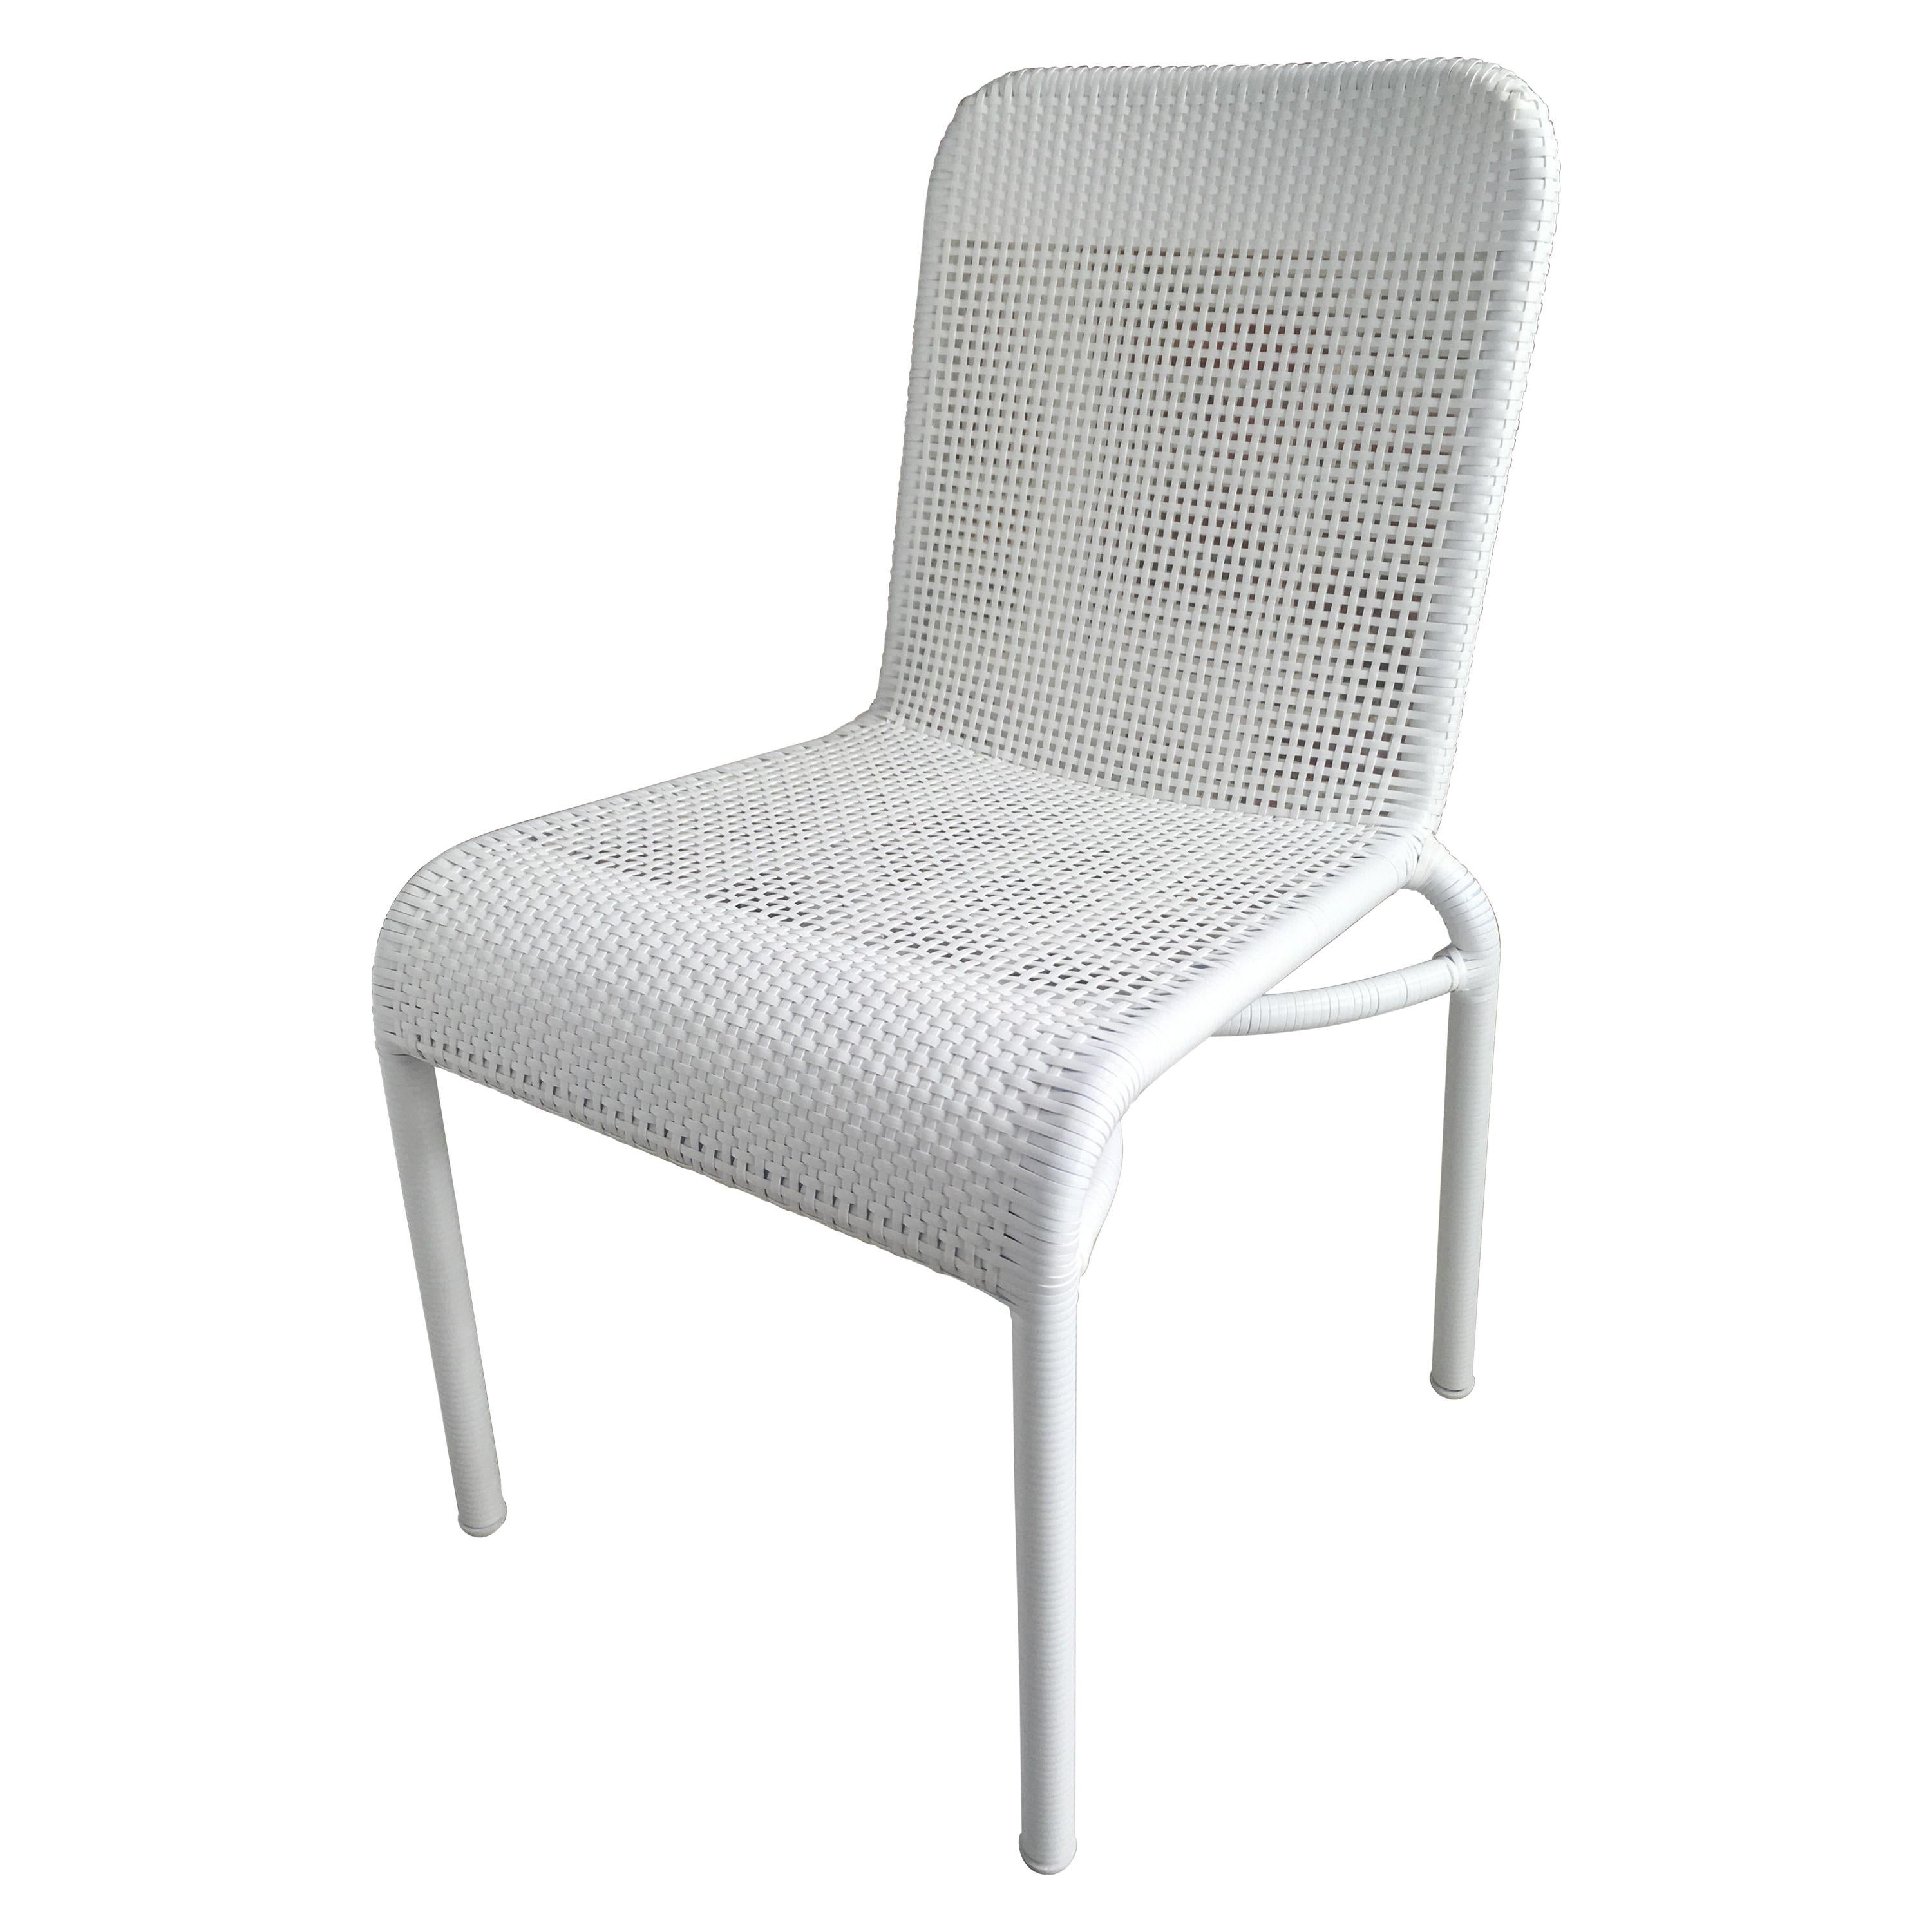 Metal And White Braided Resin Outdoor Chair For Sale